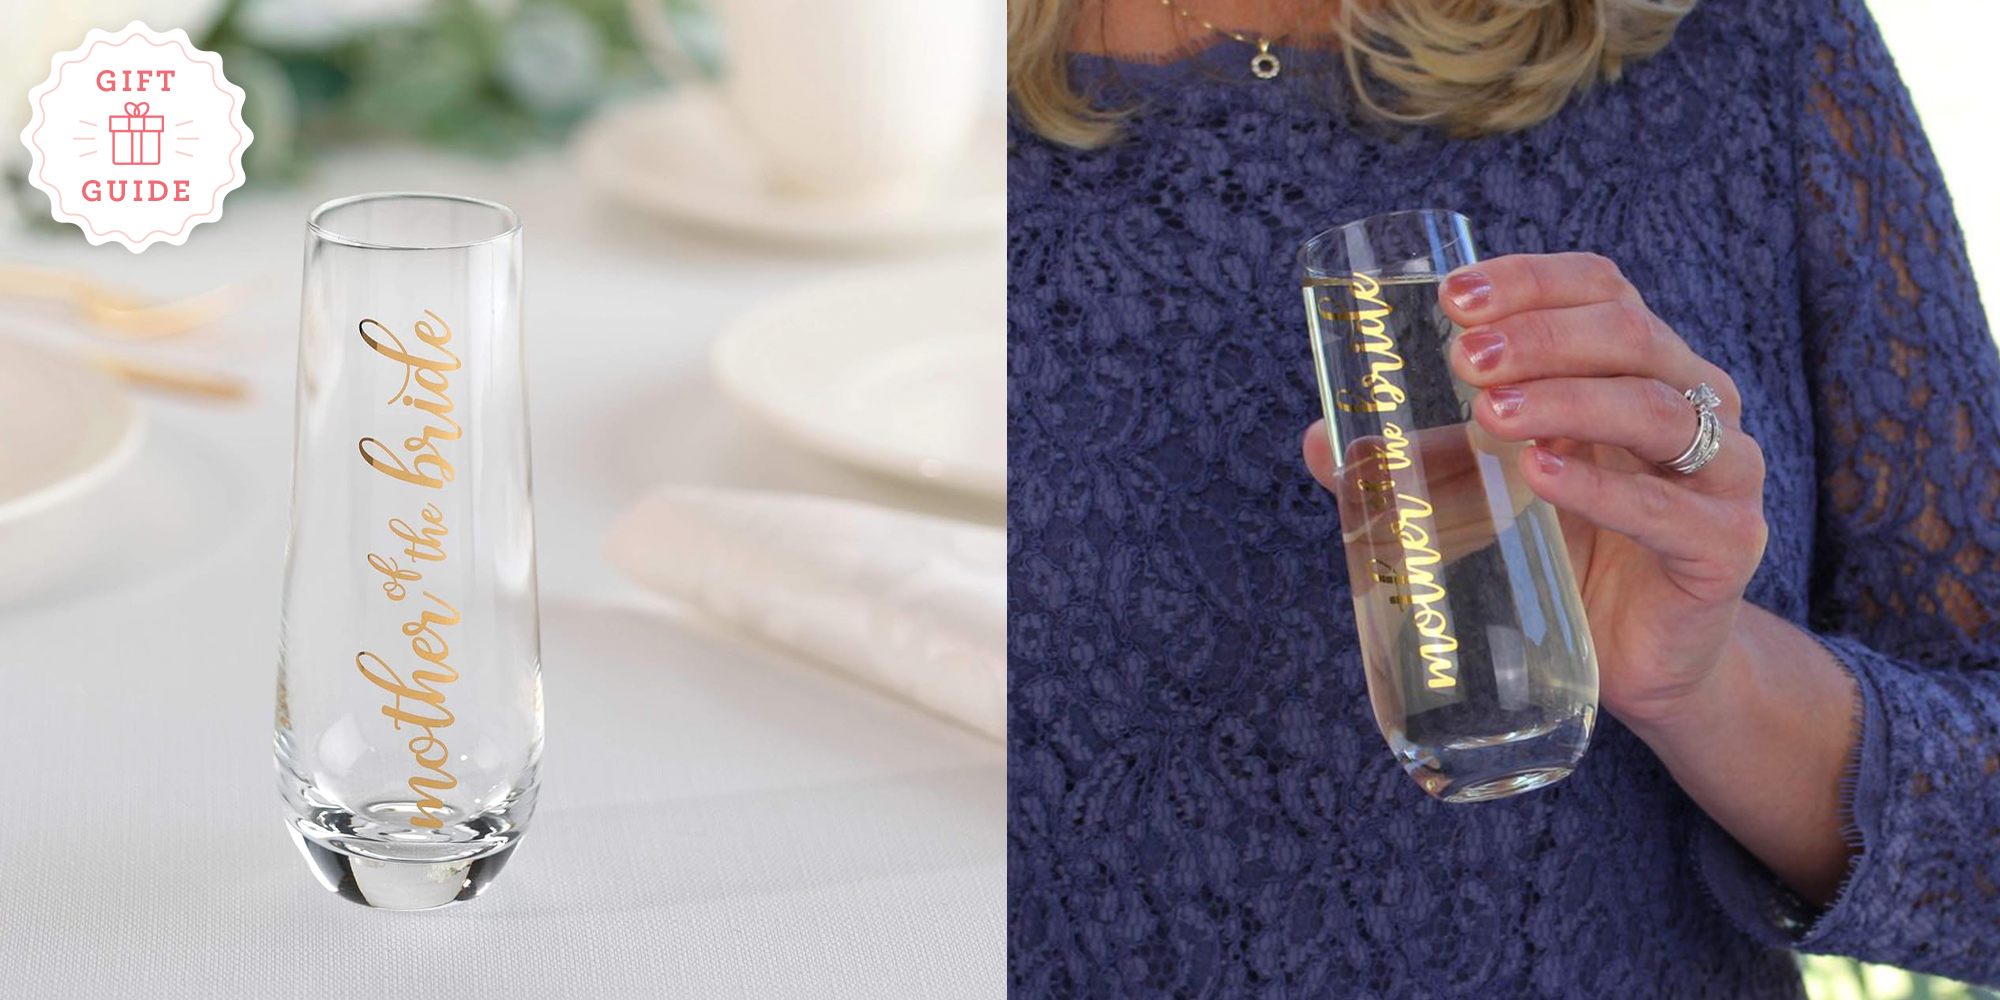 Thoughtful Mother of the Bride Gift Ideas